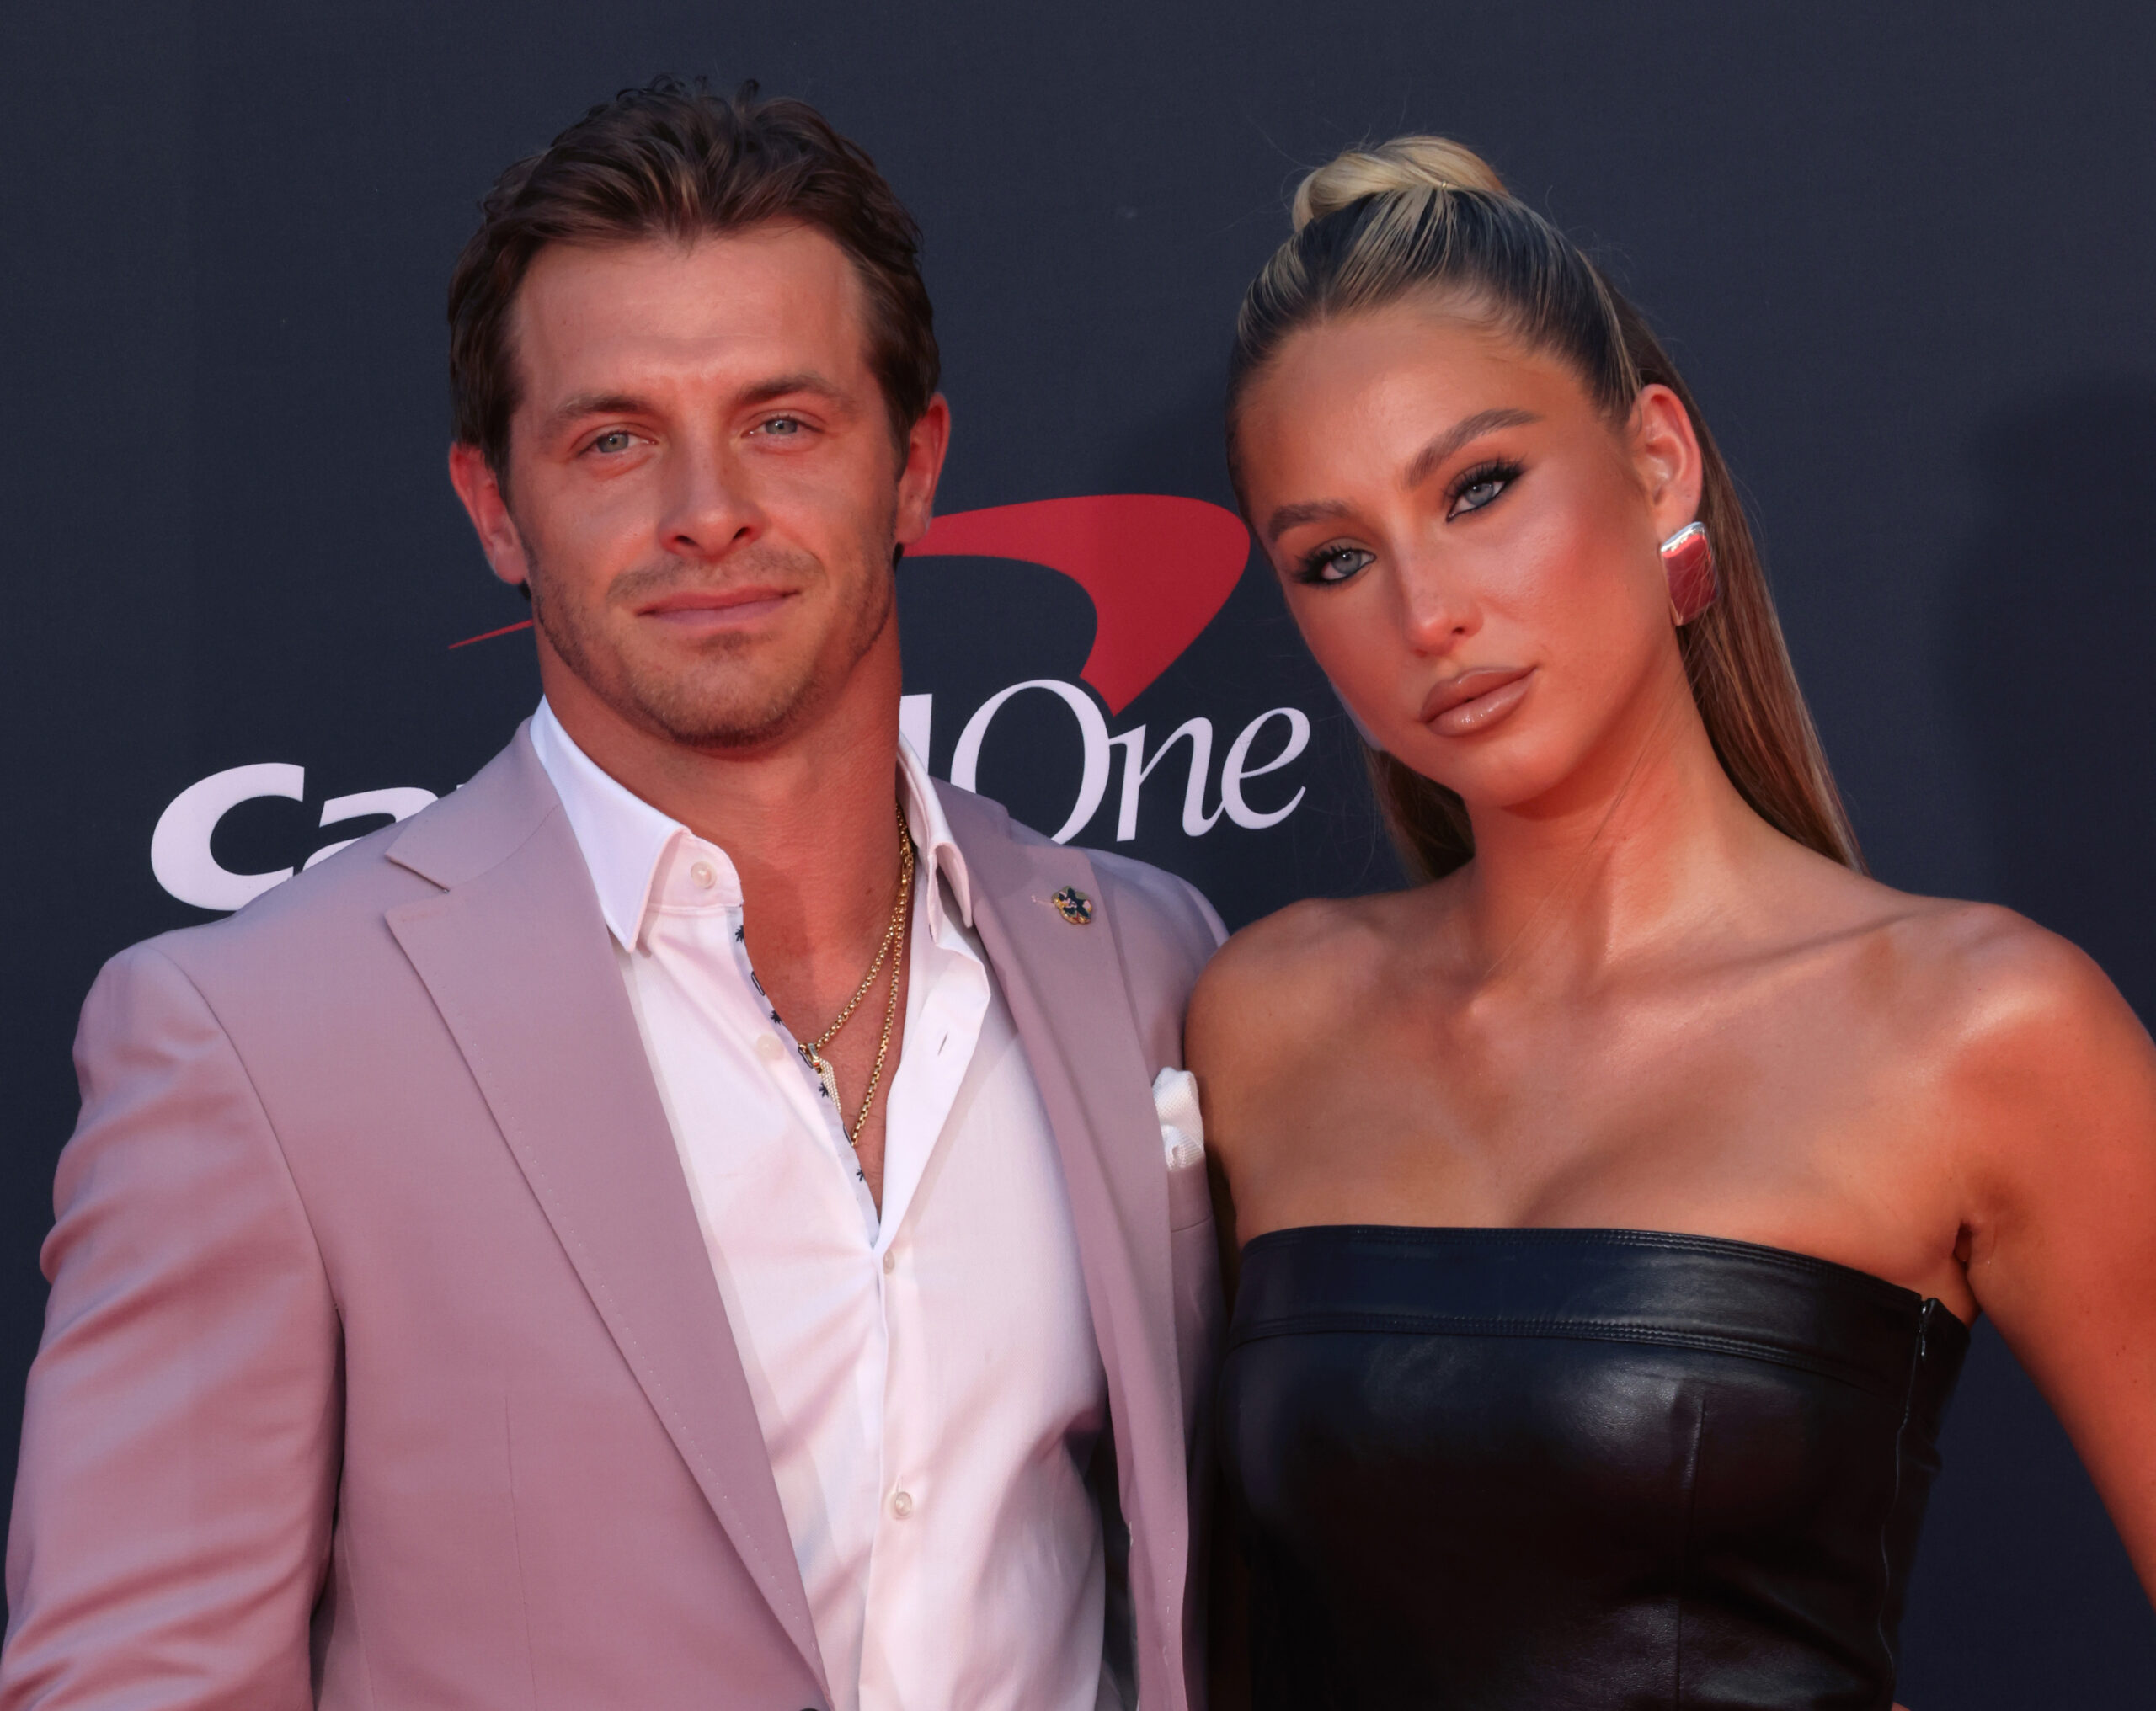 HOLLYWOOD, CALIFORNIA - JULY 12: Braxton Berrios and Alix Earle attend the 2023 ESPYs Awards at the Dolby Theatre on July 12, 2023 in Hollywood, California. (Photo by David Livingston/FilmMagic)